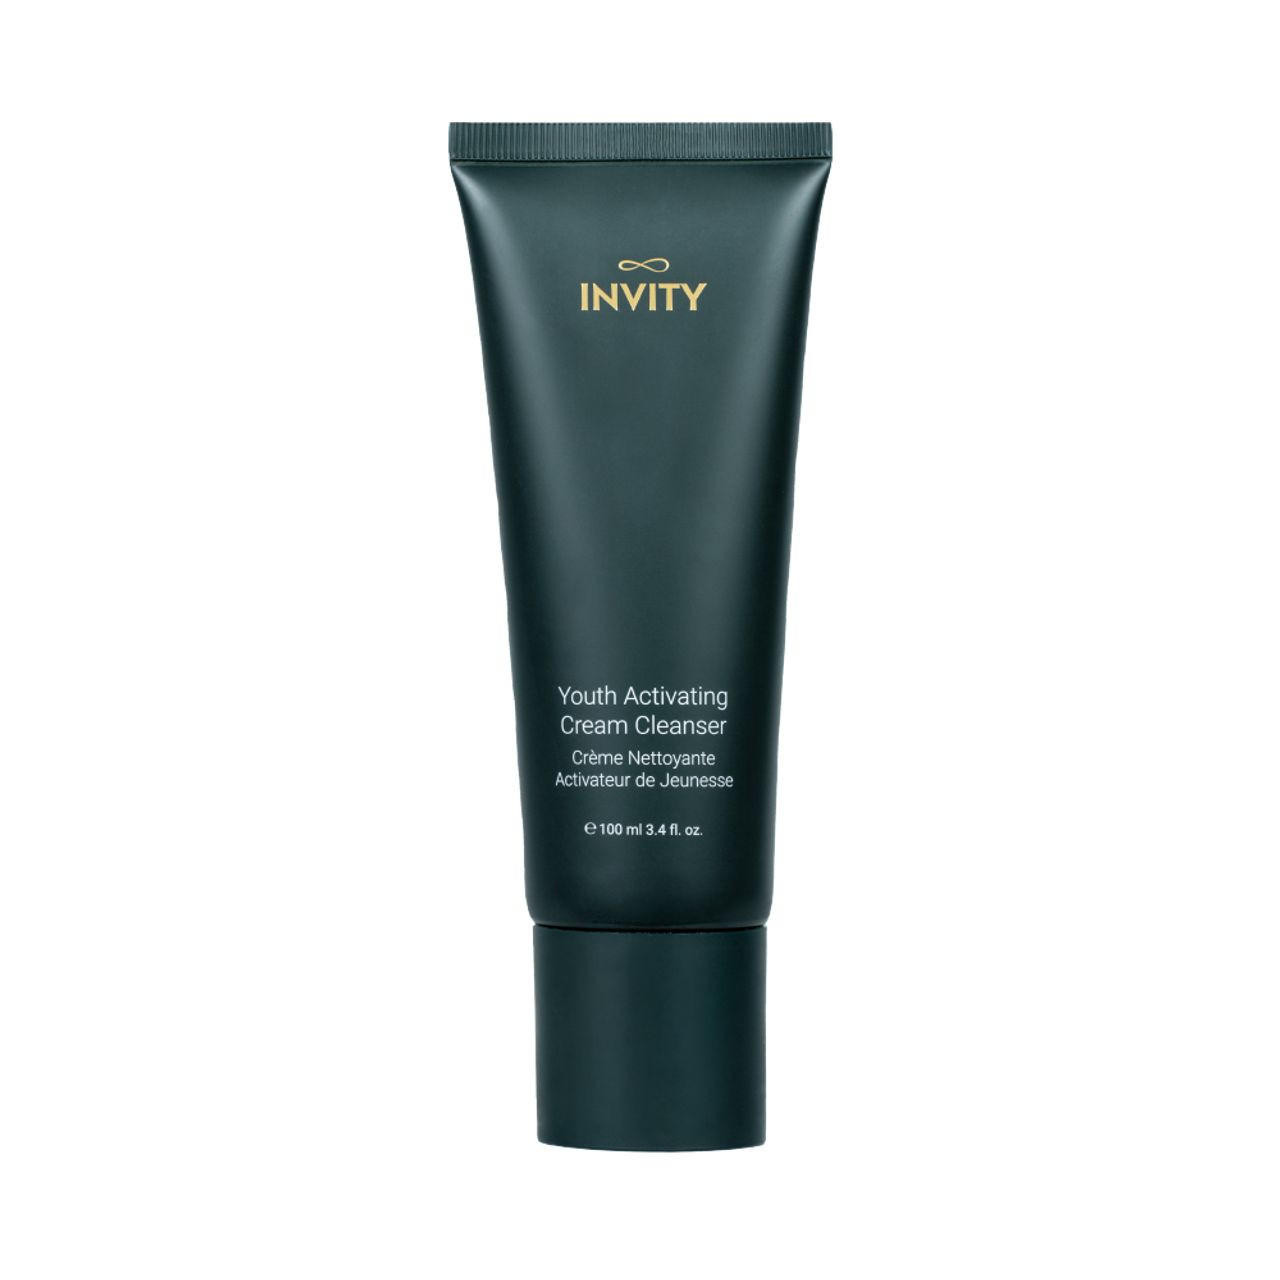 Youth Activating Cream Cleanser